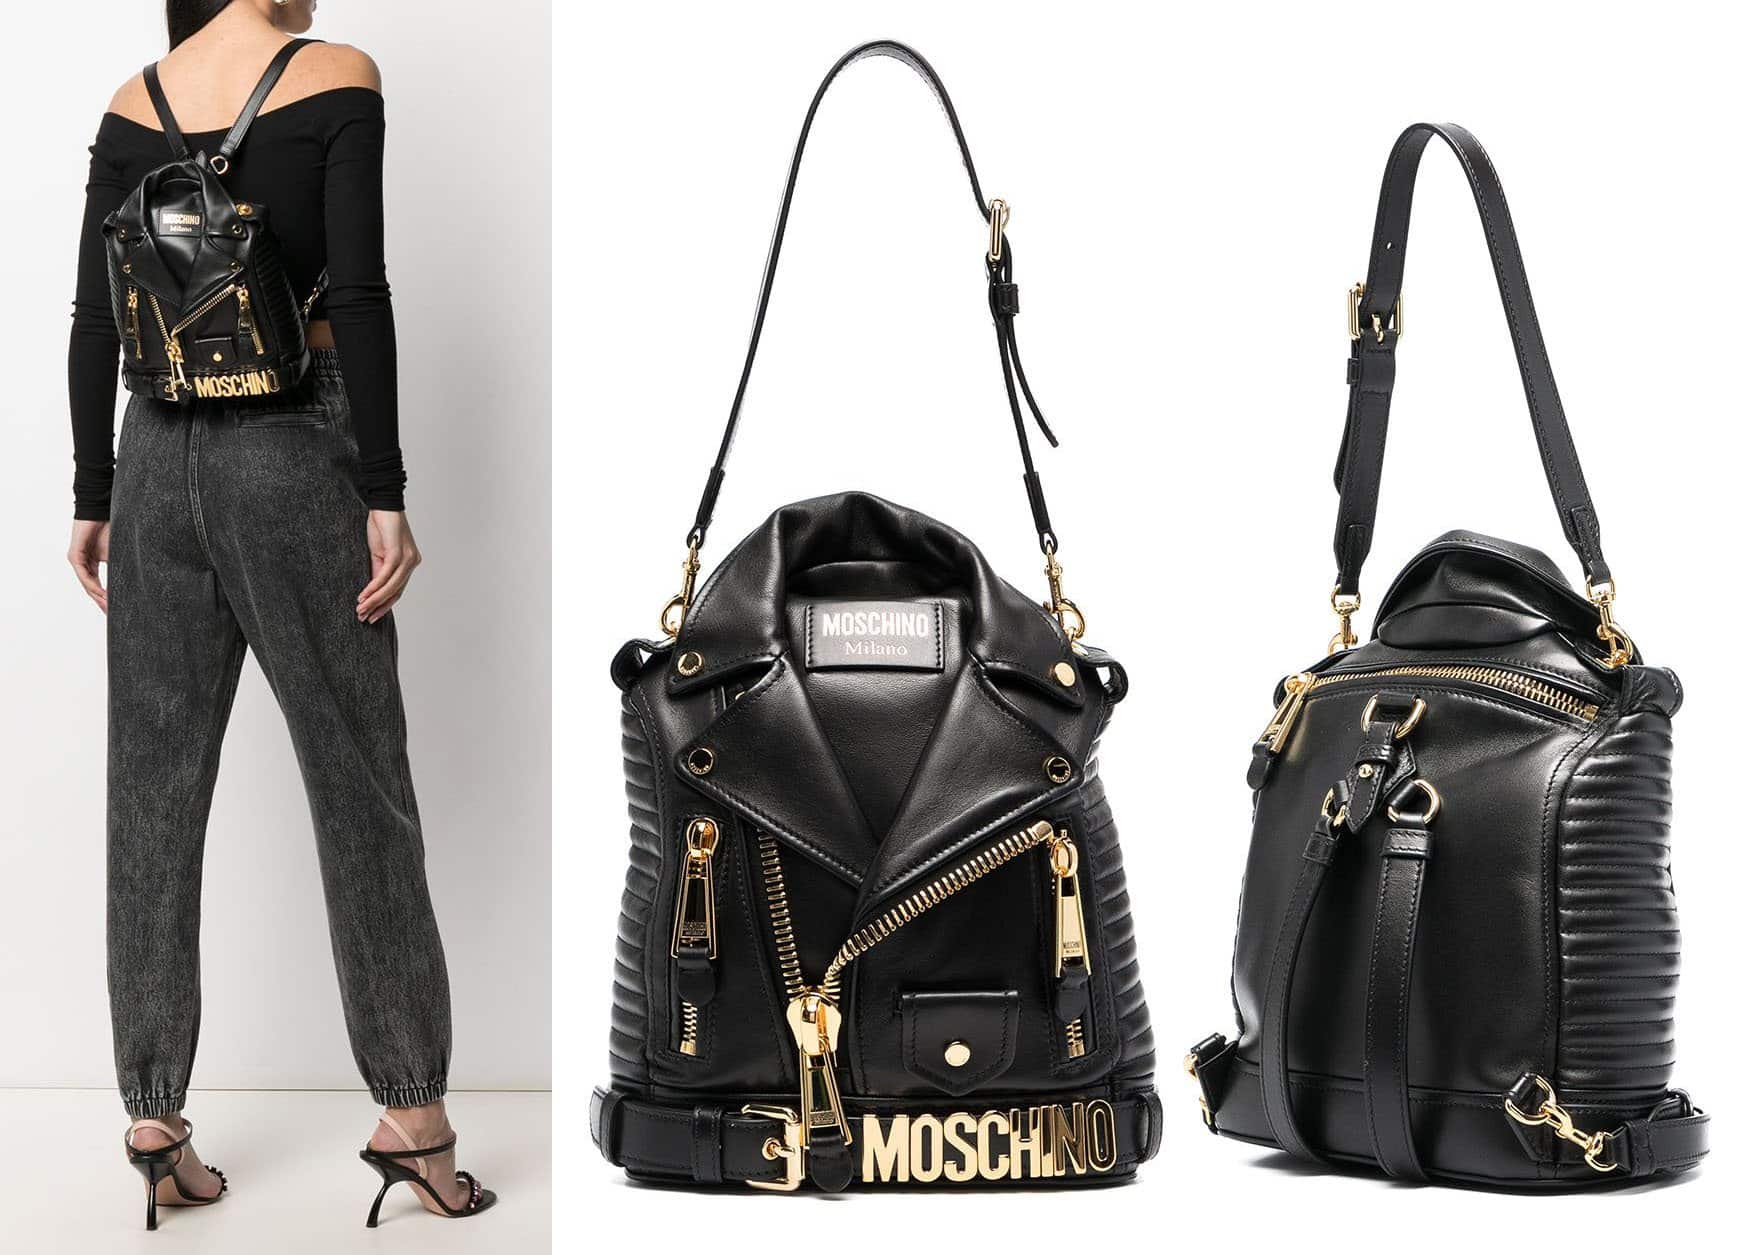 Offering tough-chic edge, Moschino's mini backpack takes inspiration from leather biker jacket and features two adjustable detachable shoulder straps for several carrying options